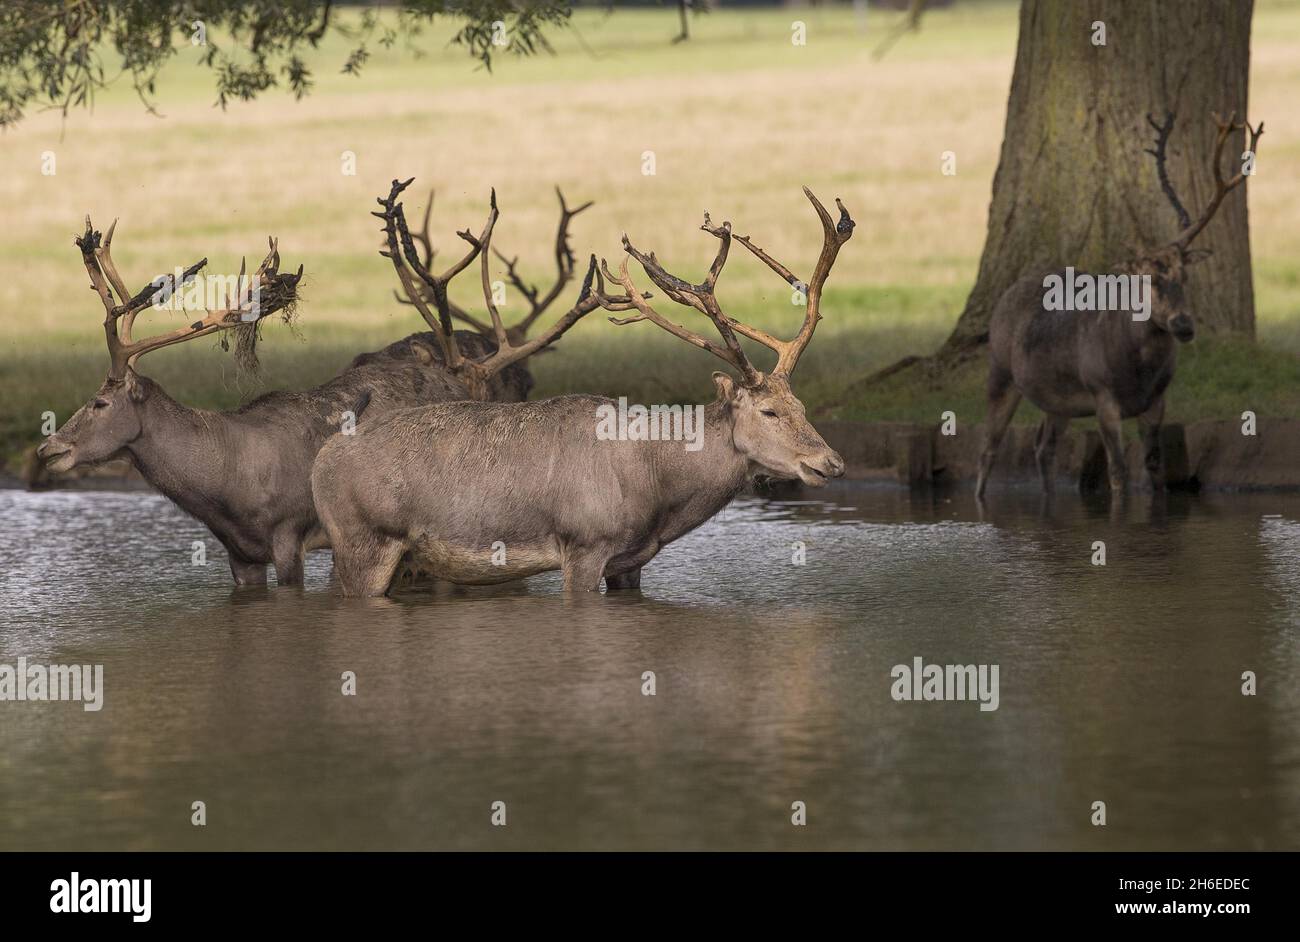 Deer enjoy the warm weather at the Woburn Abbey Deer Park in Bedfordshire, one of the largest private conservation parks in Europe.  Stock Photo